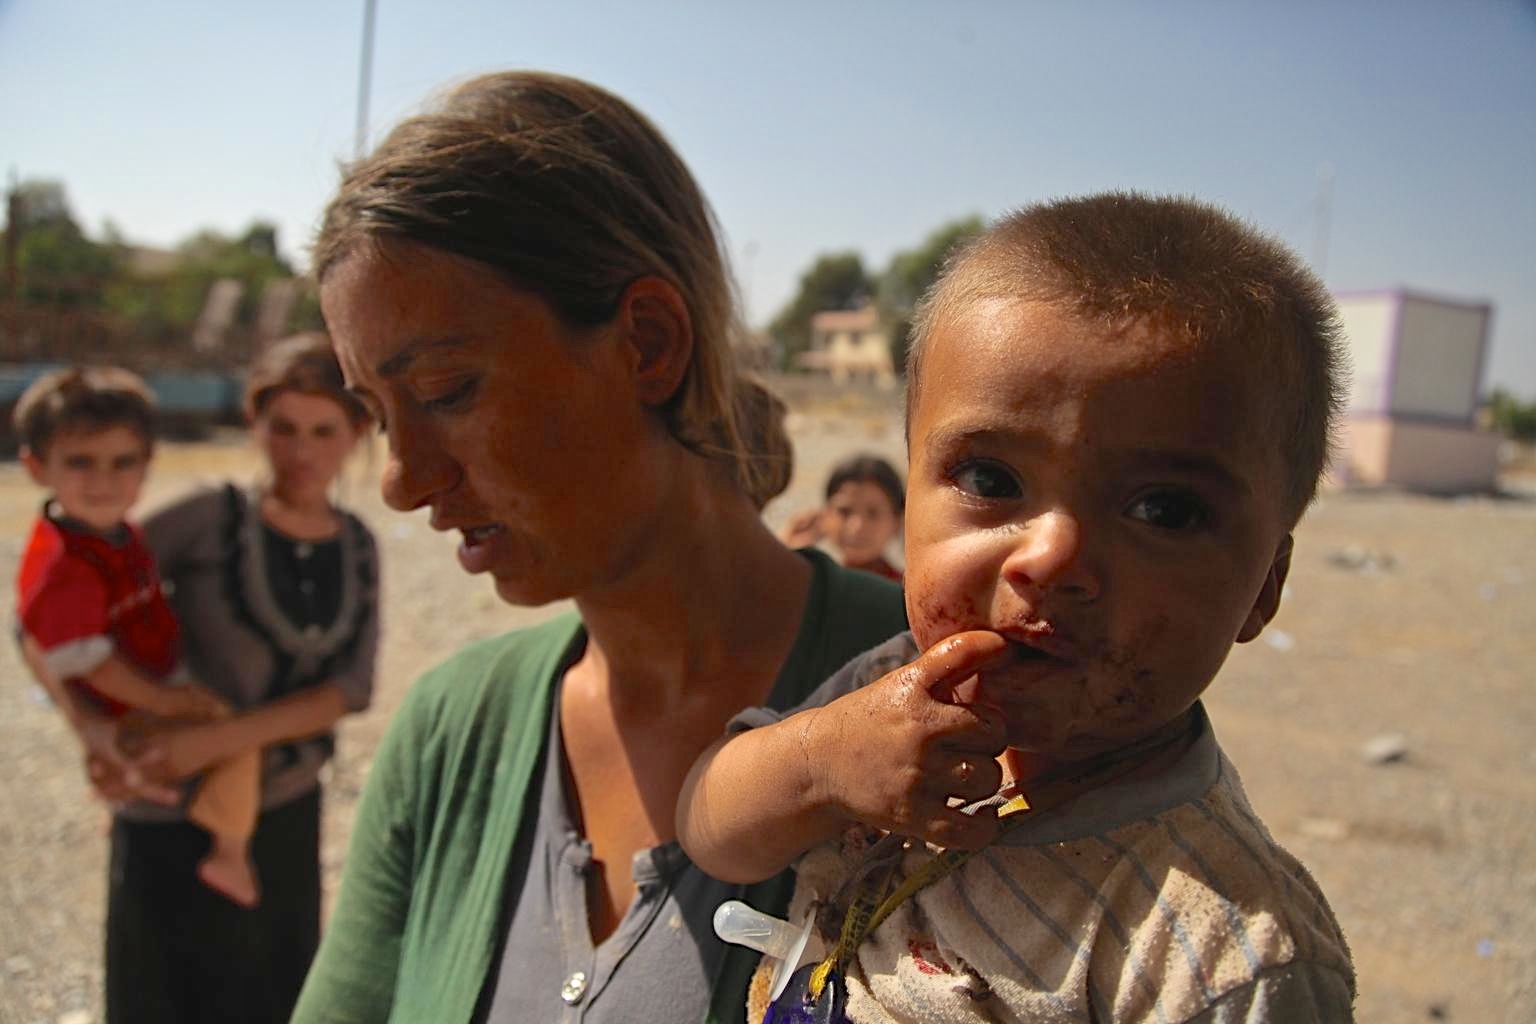 In August 2014, a woman and her young son are among displaced Yazidi children and adults sheltering in Dohuk Governorate, Iraq. UNICEF is providing services for displaced Yazidi  families.